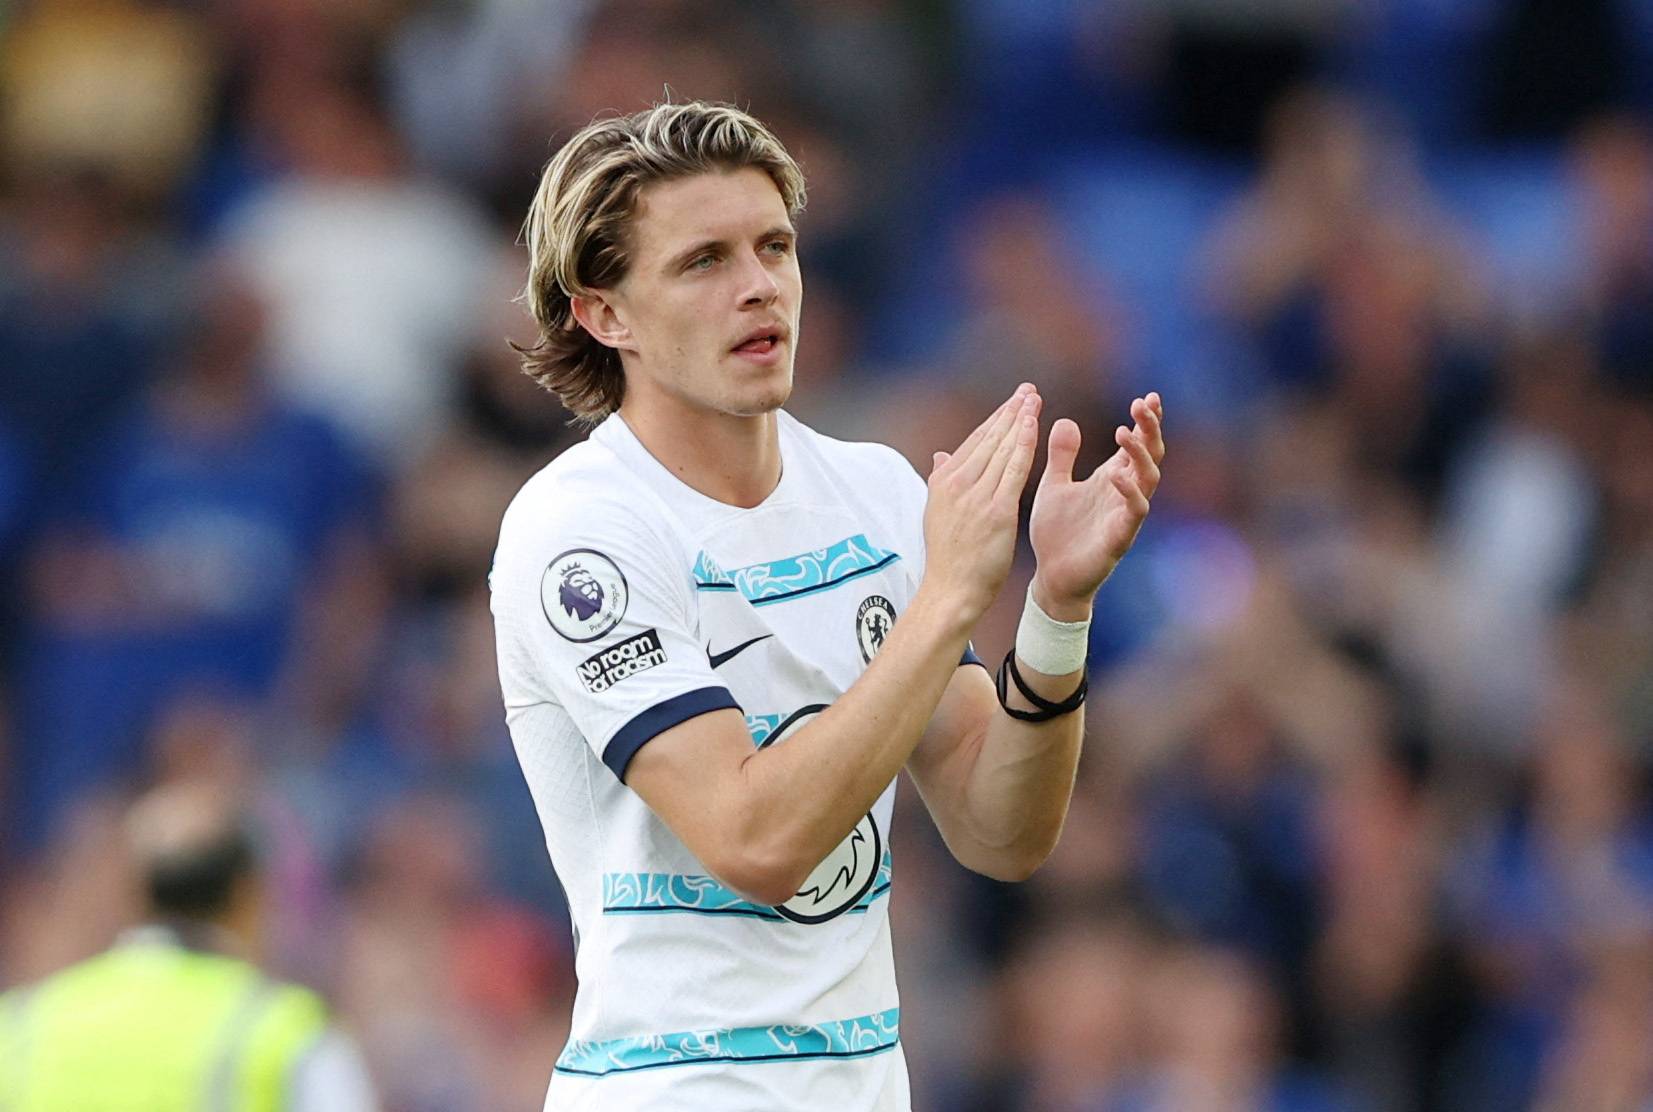 Newcastle: Conor Gallagher deal unlikely - Follow up